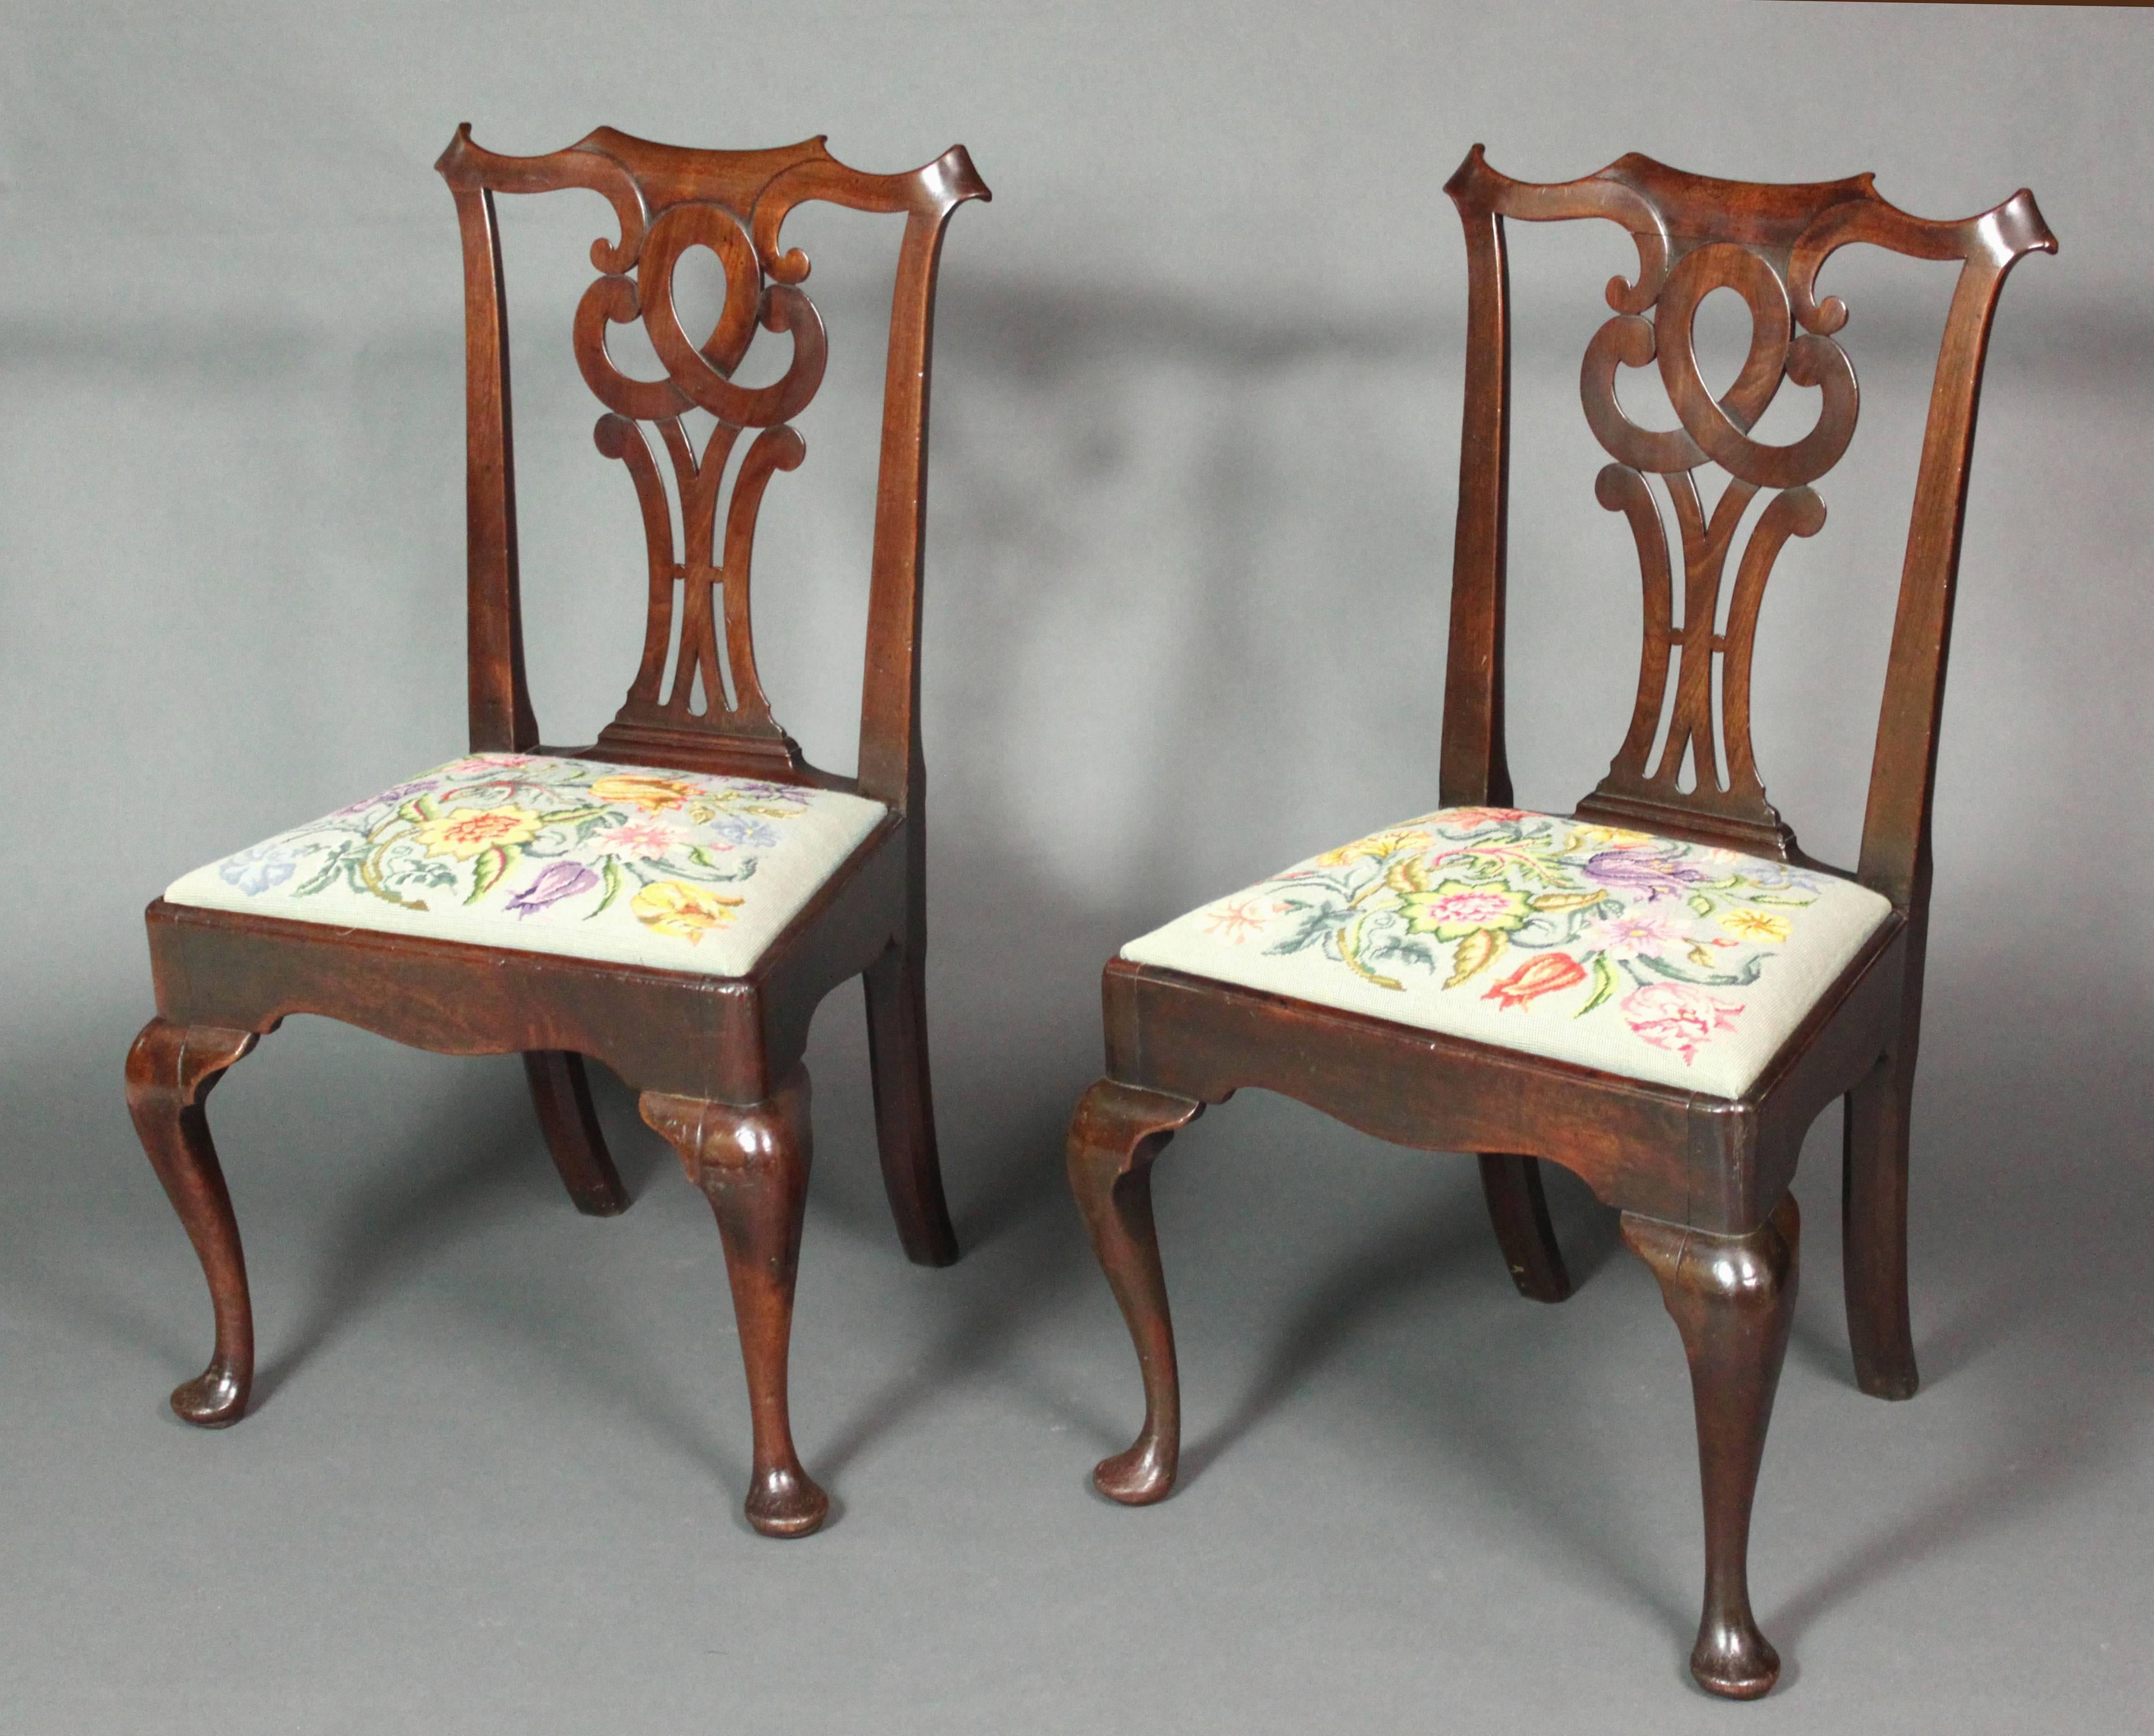 A pair of George II cabriole leg chairs in mahogany of a good color and patina; attractive pierced splats and shaped front seat rails.
Hand-stitched modern needlework seats. One old crack in a back leg, but structurally sound; otherwise in good